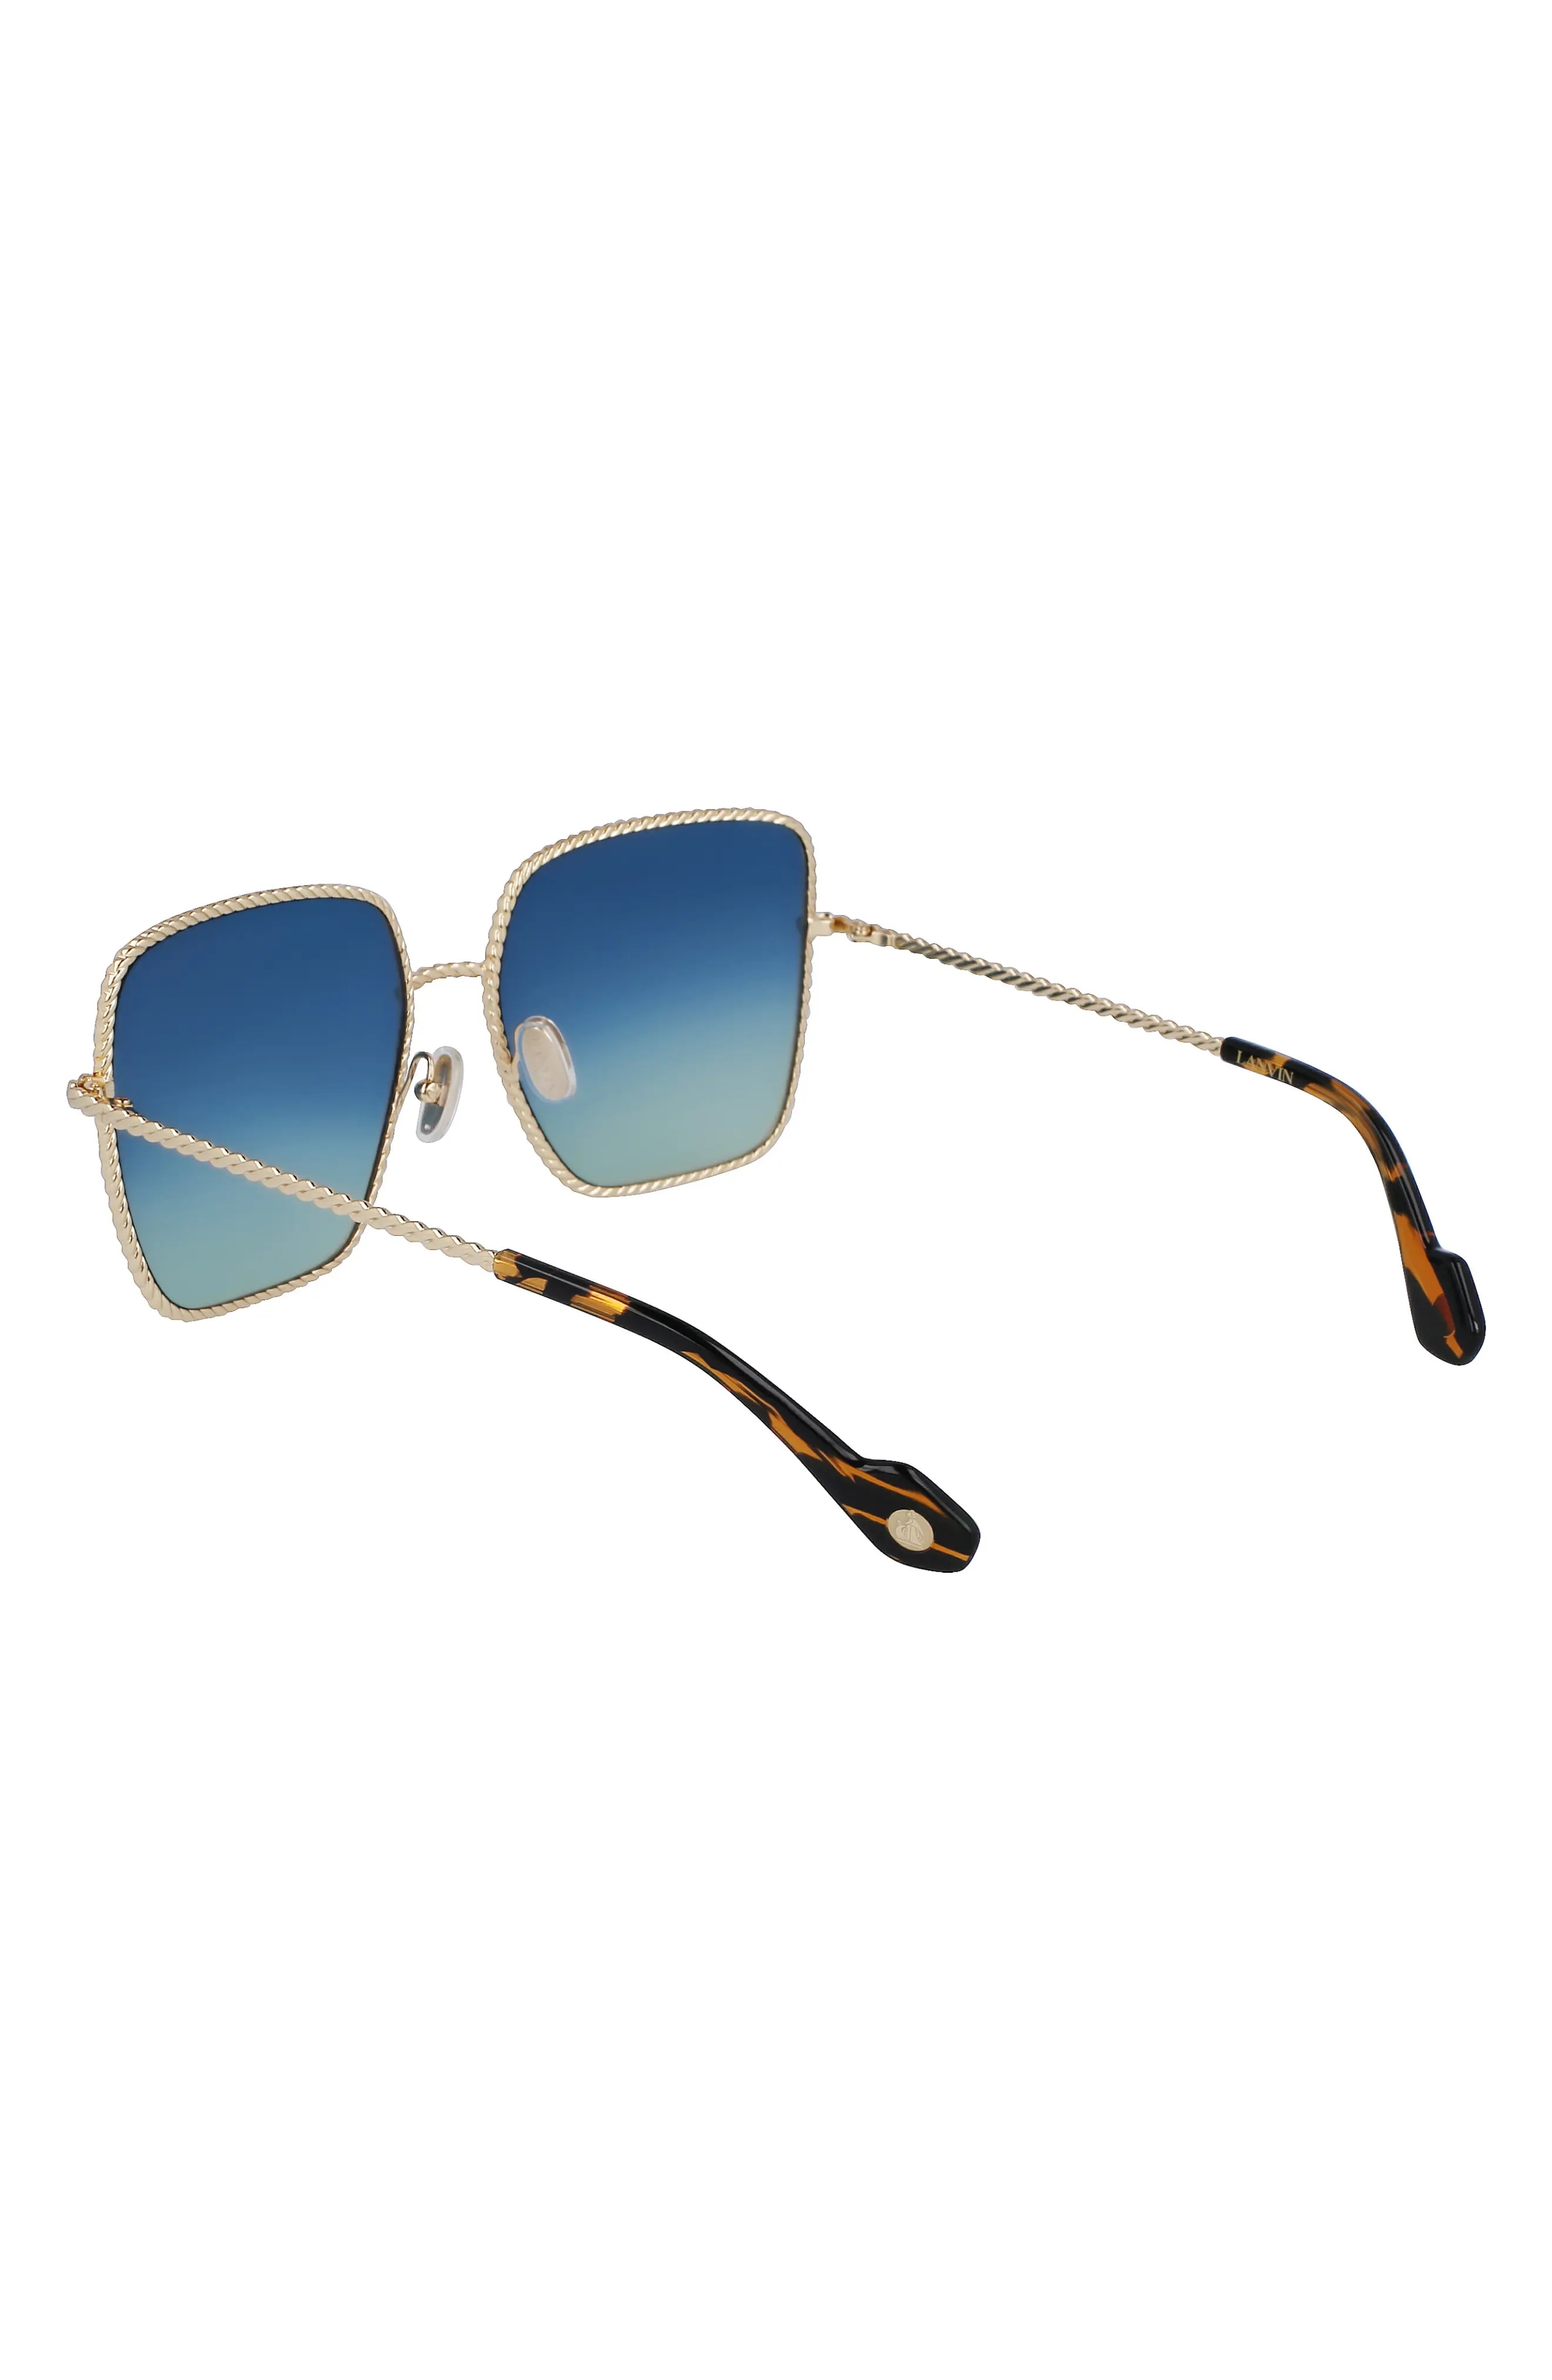 Babe 59mm Gradient Square Sunglasses in Gold/Gradient Blue Green - 4